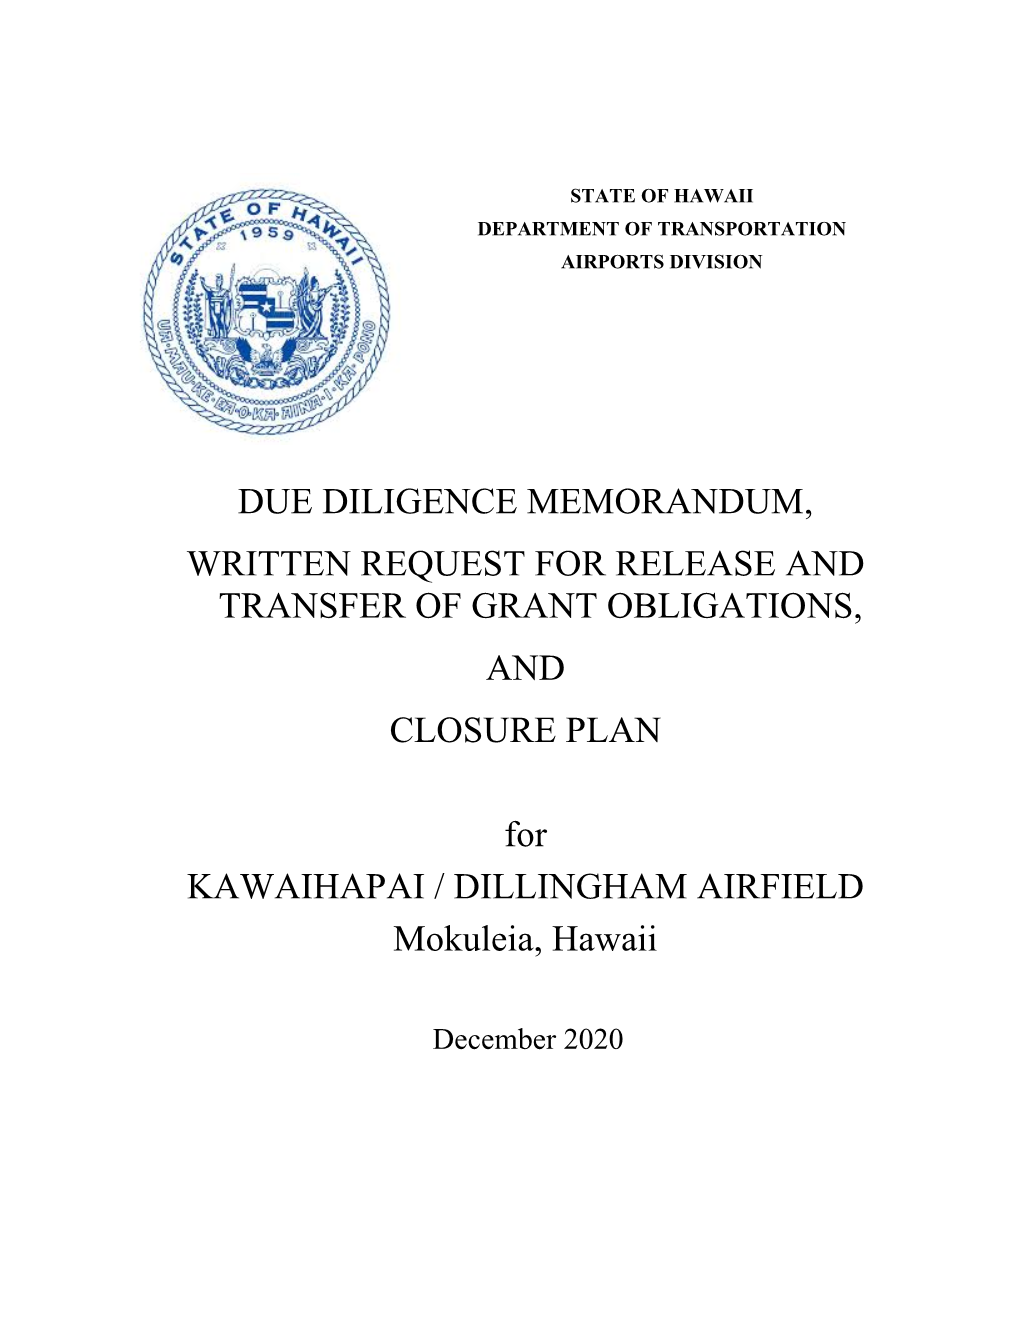 Due Diligence Memorandum, Written Request for Release and Transfer of Grant Obligations, and Closure Plan